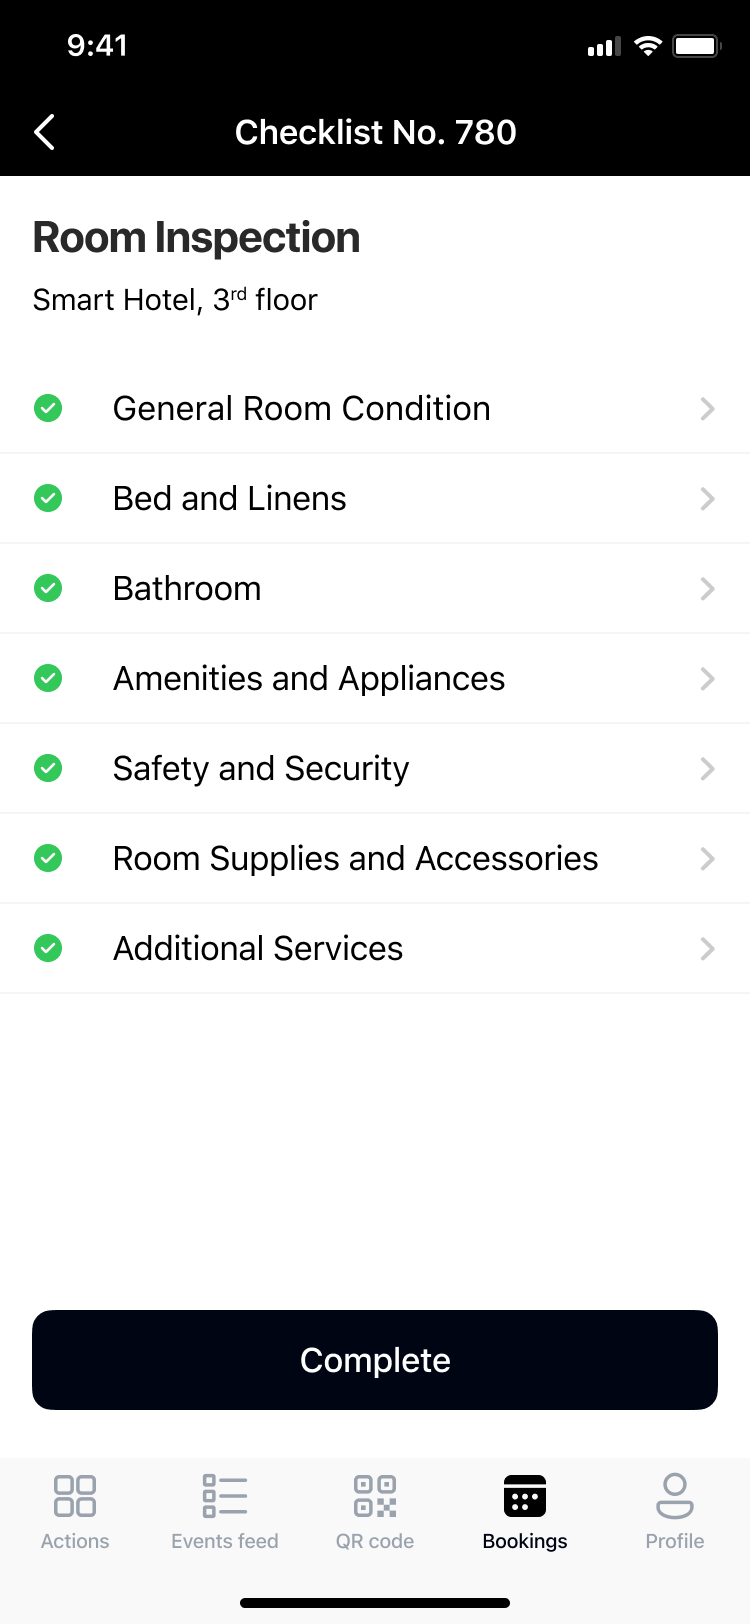 Checklist for room inspection